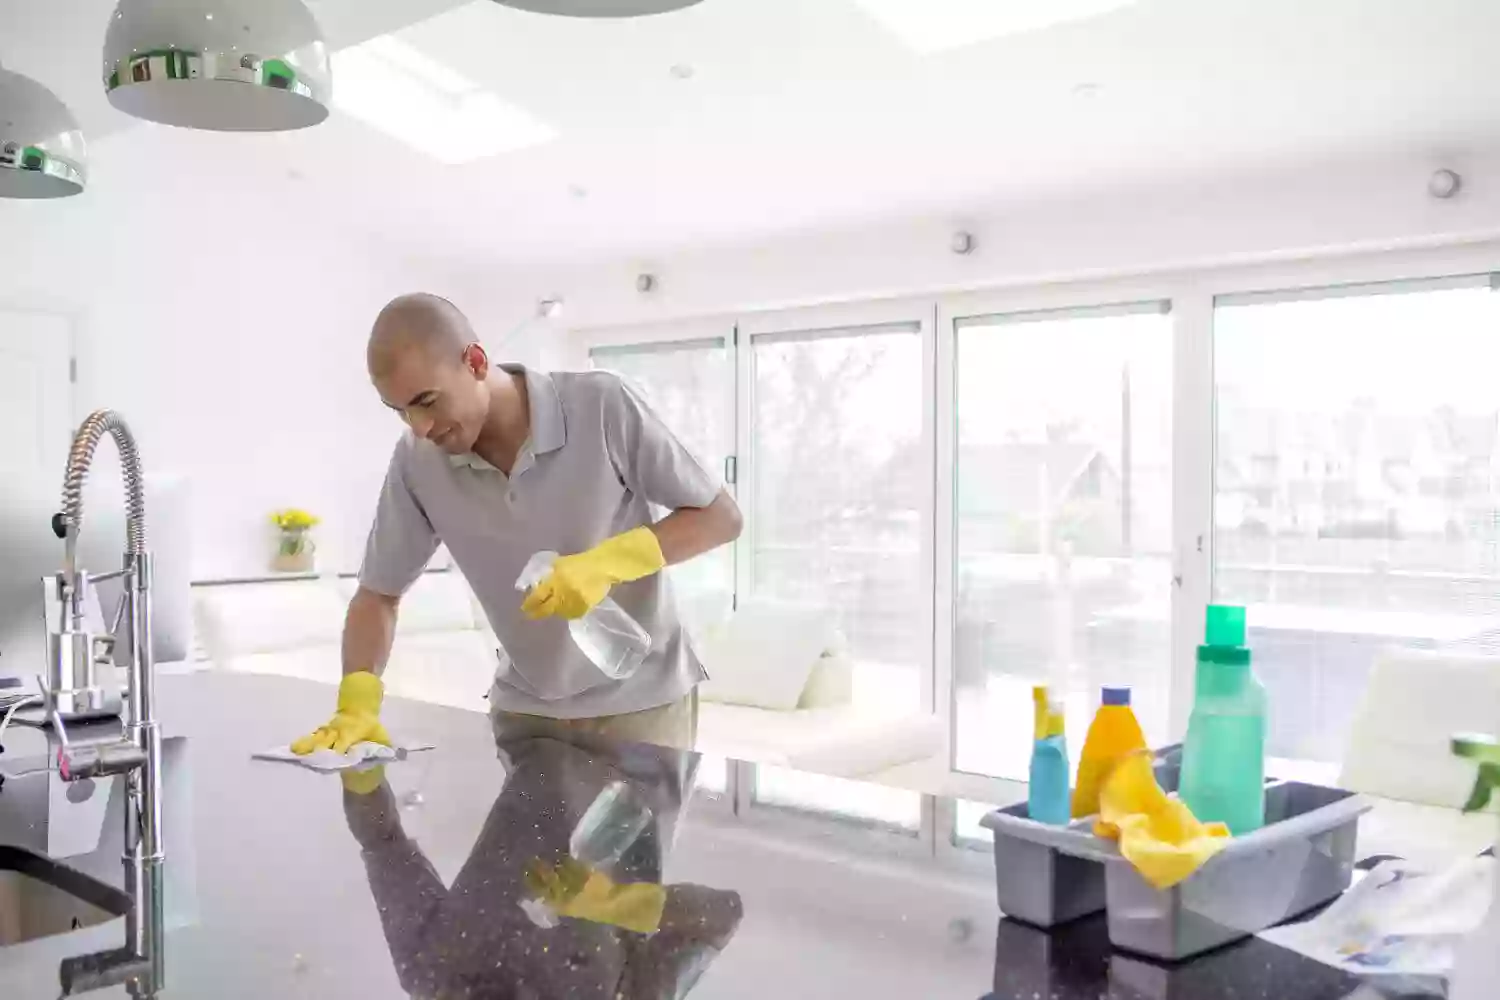 Maid Your Day Seattle | Commercial Office & Residential House Cleaning Services, Construction Cleanup in Bothell, WA